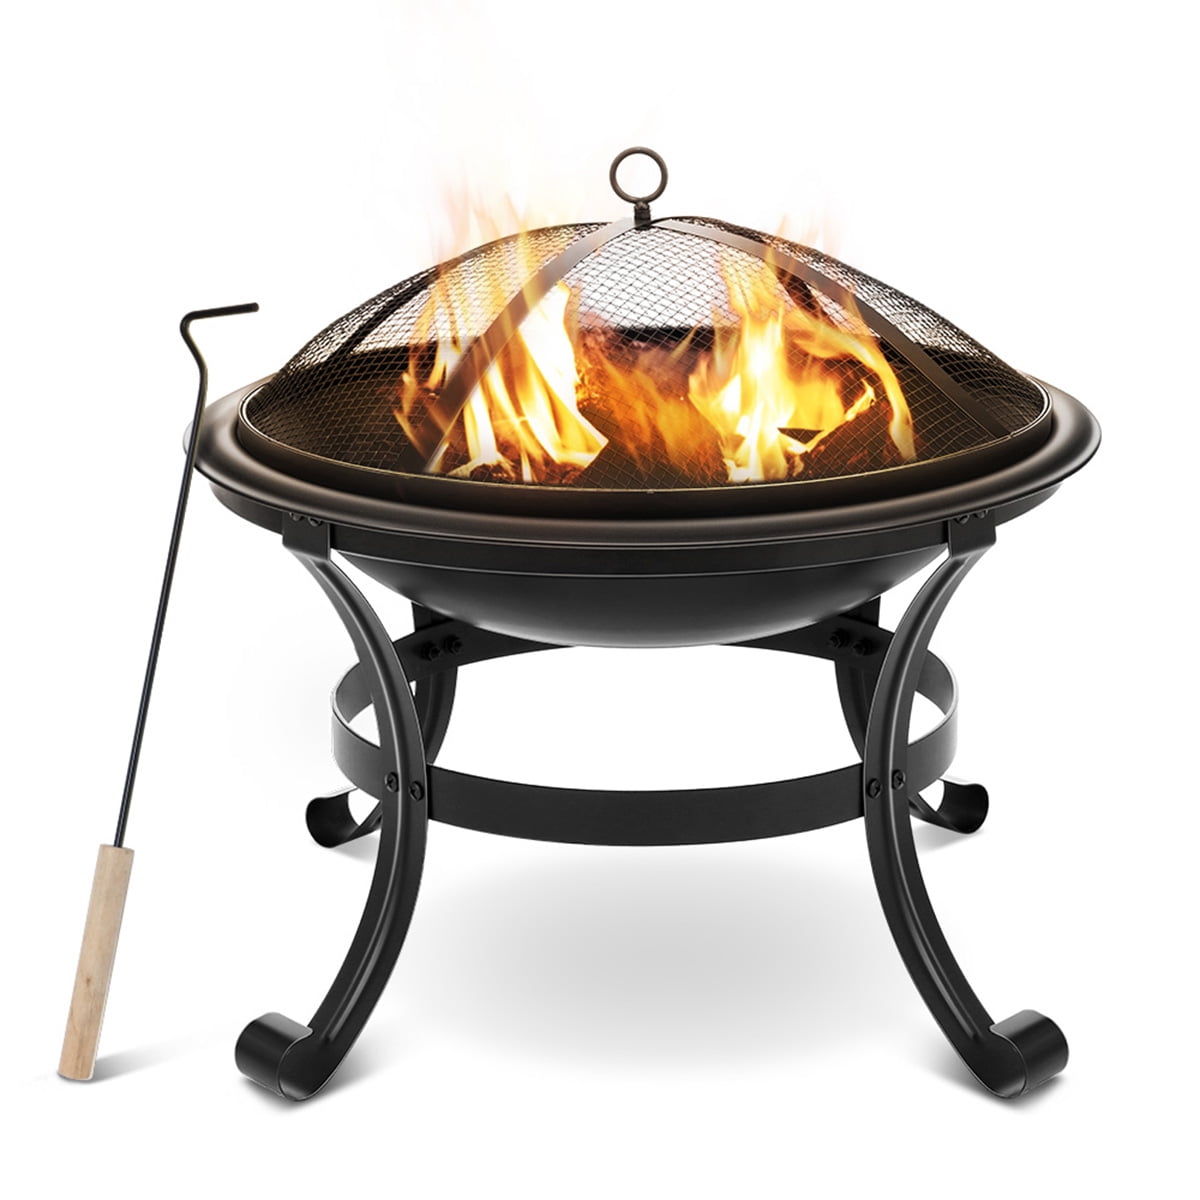 22 Fire Pits Bowl Outdoor, Steel Fire Pit Bowl